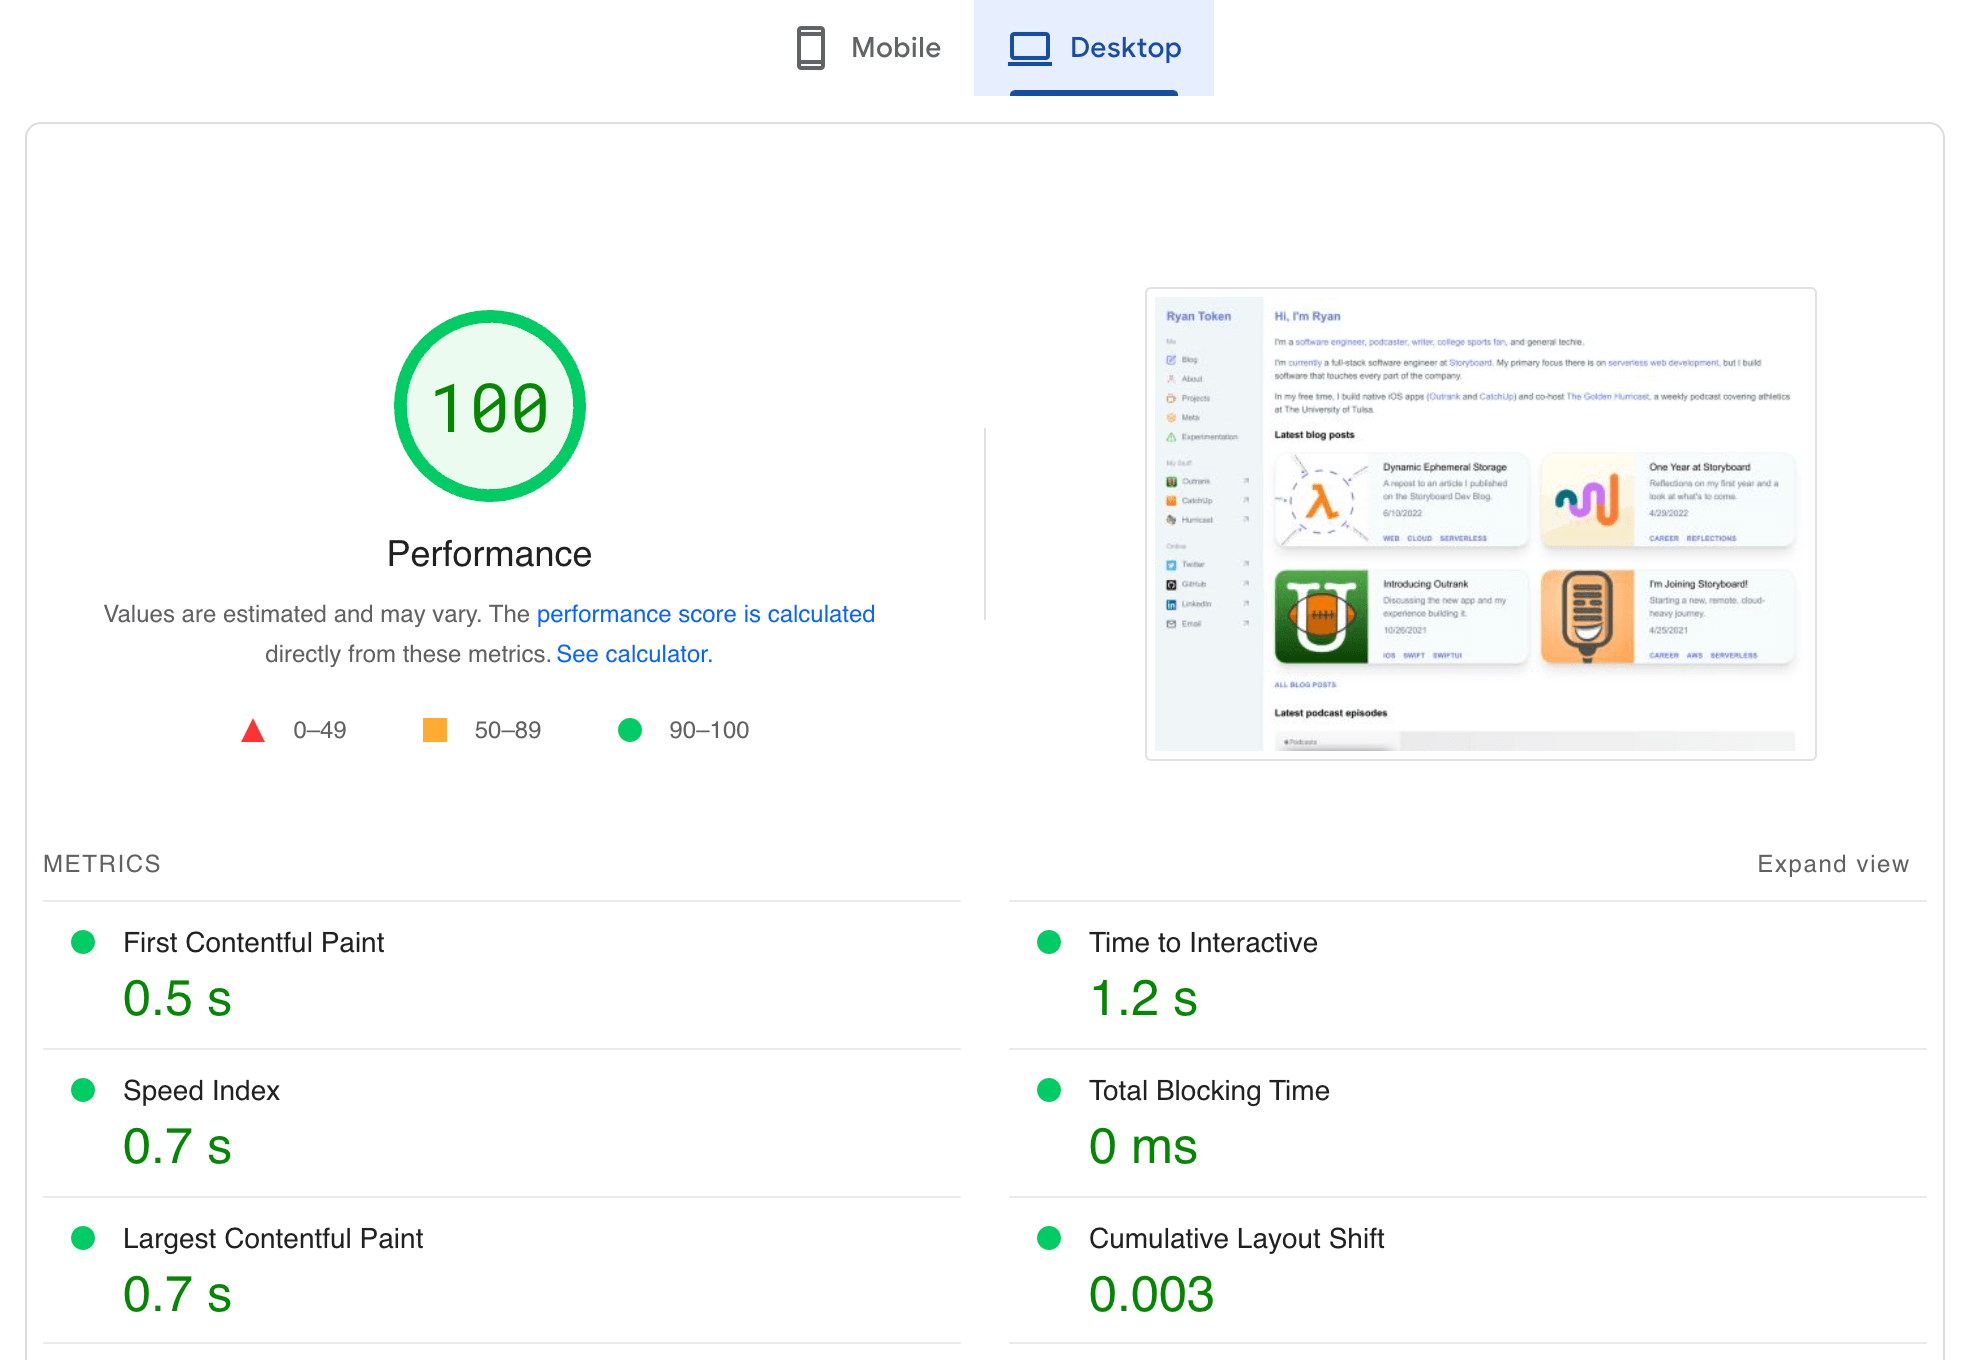 PageSpeed Insights scores for the SvelteKit site on desktop